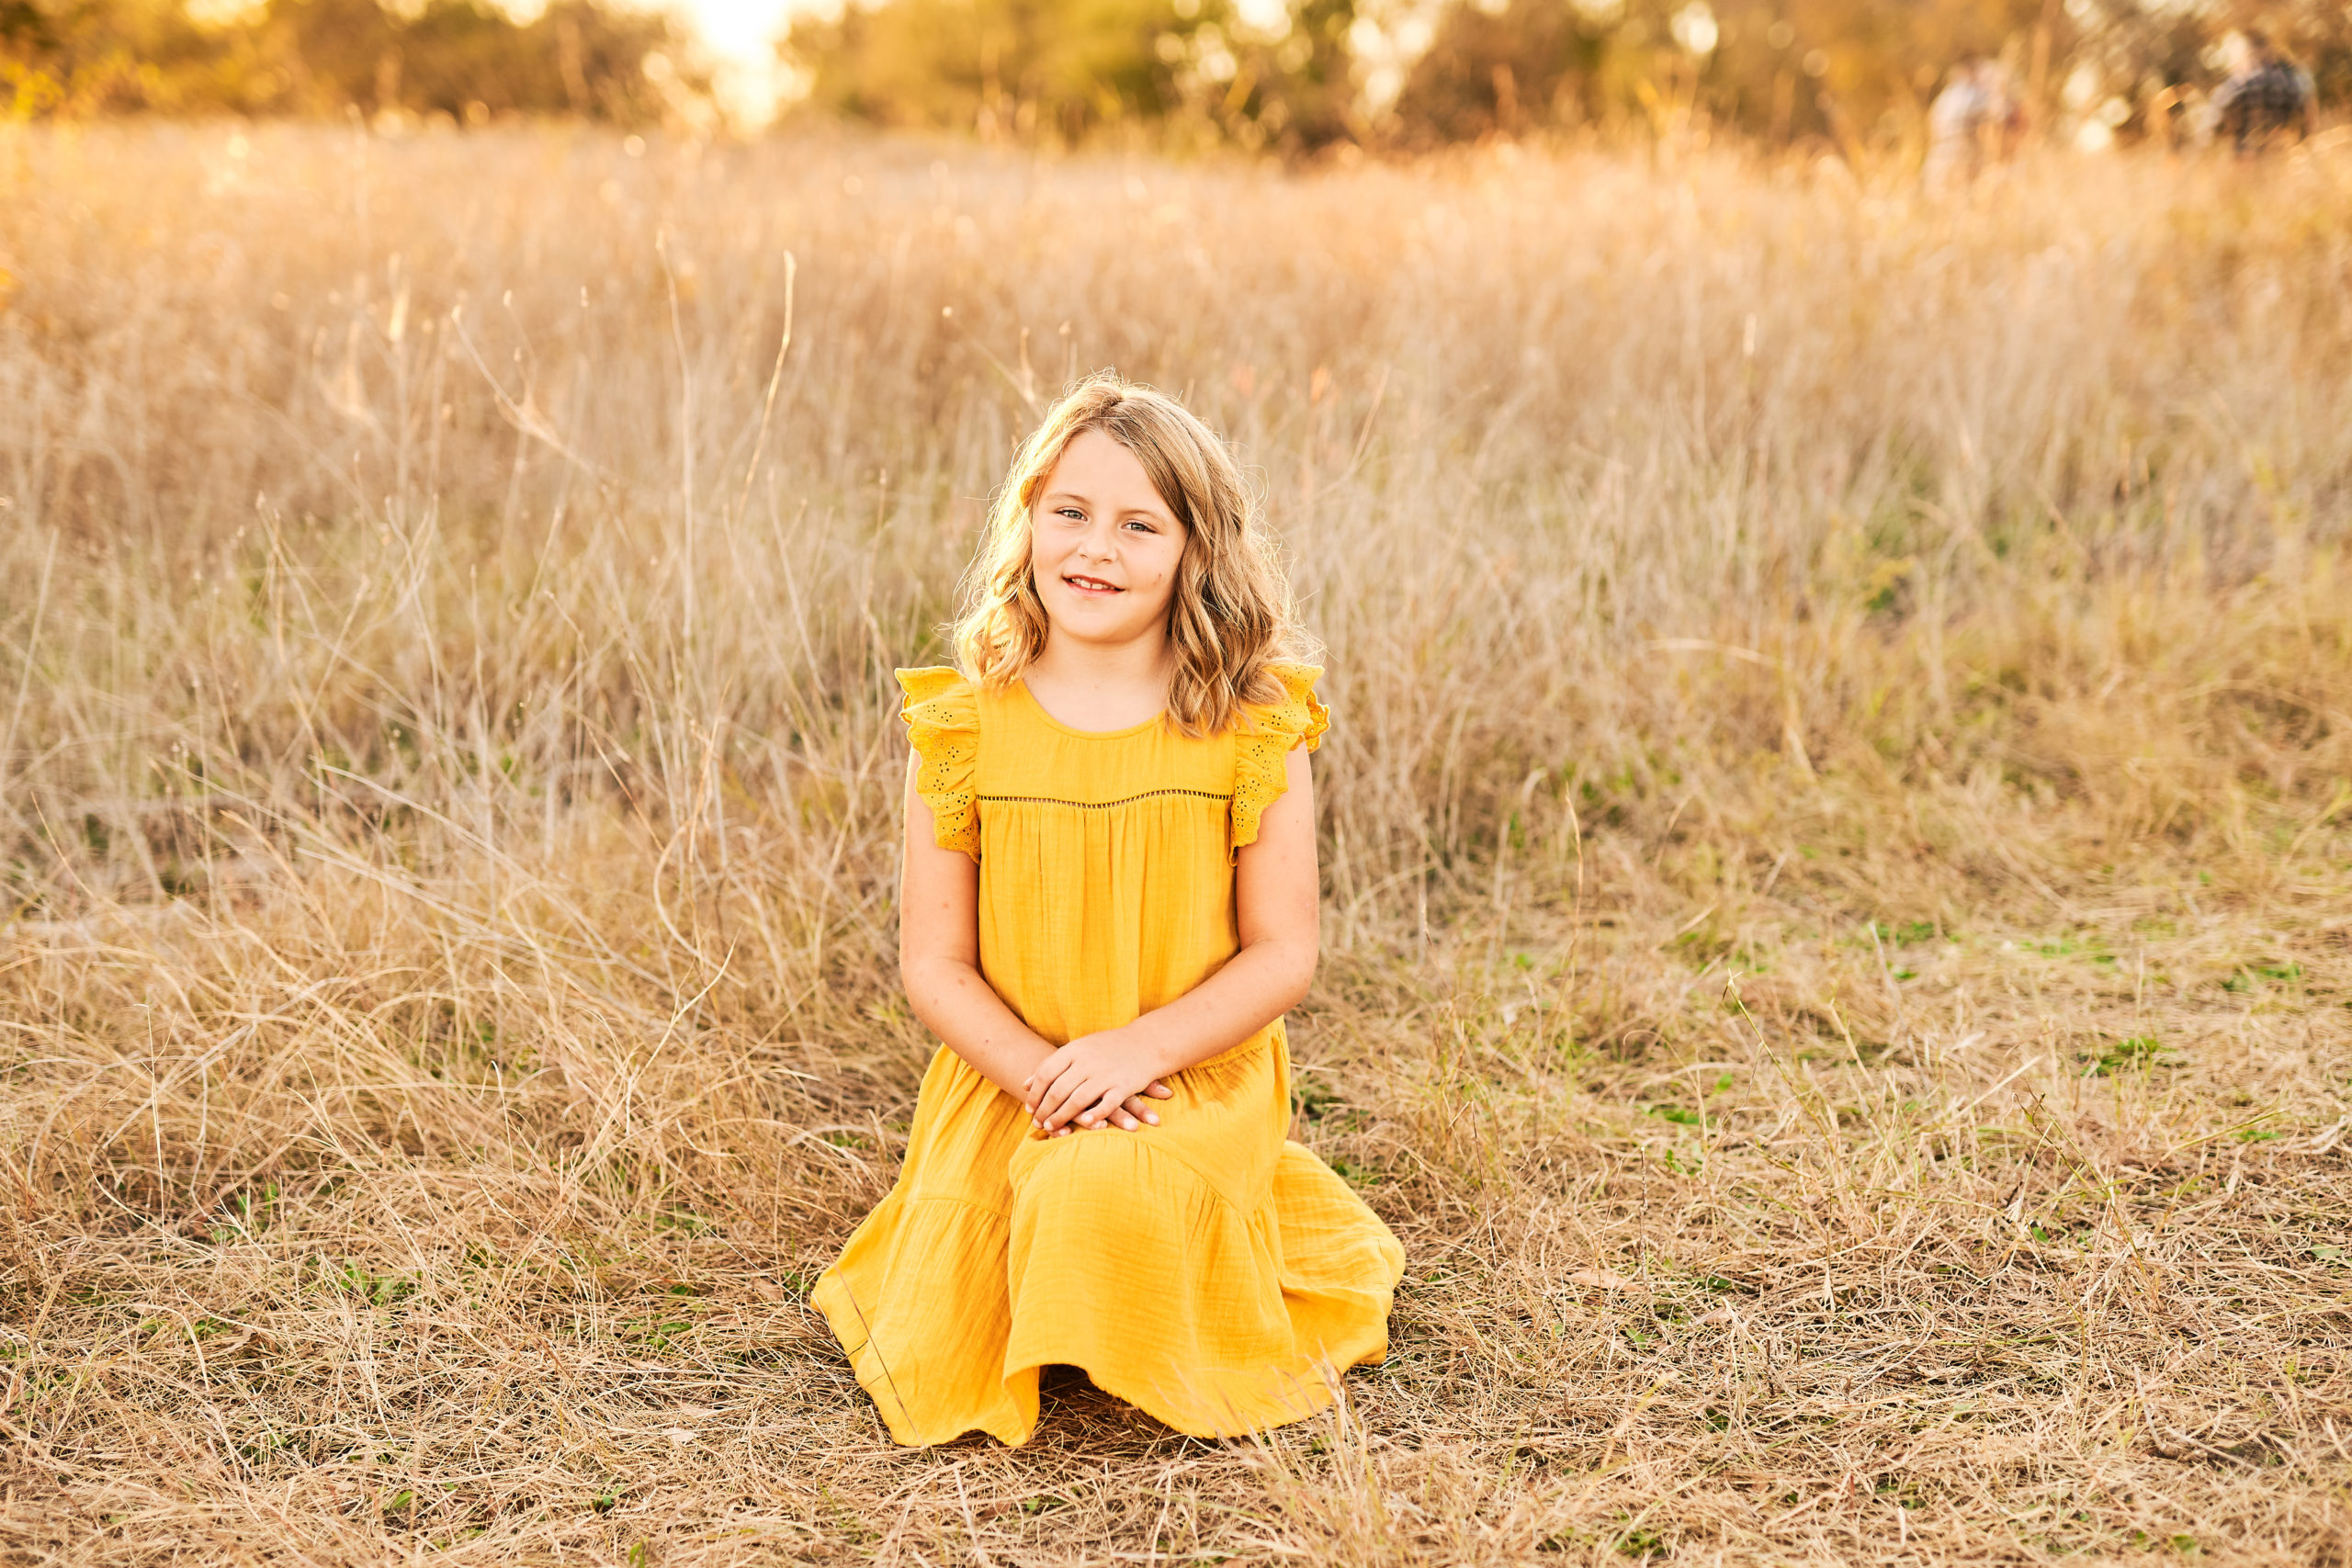 Young girl in a yellow dress sitting down in the grass during golden hour